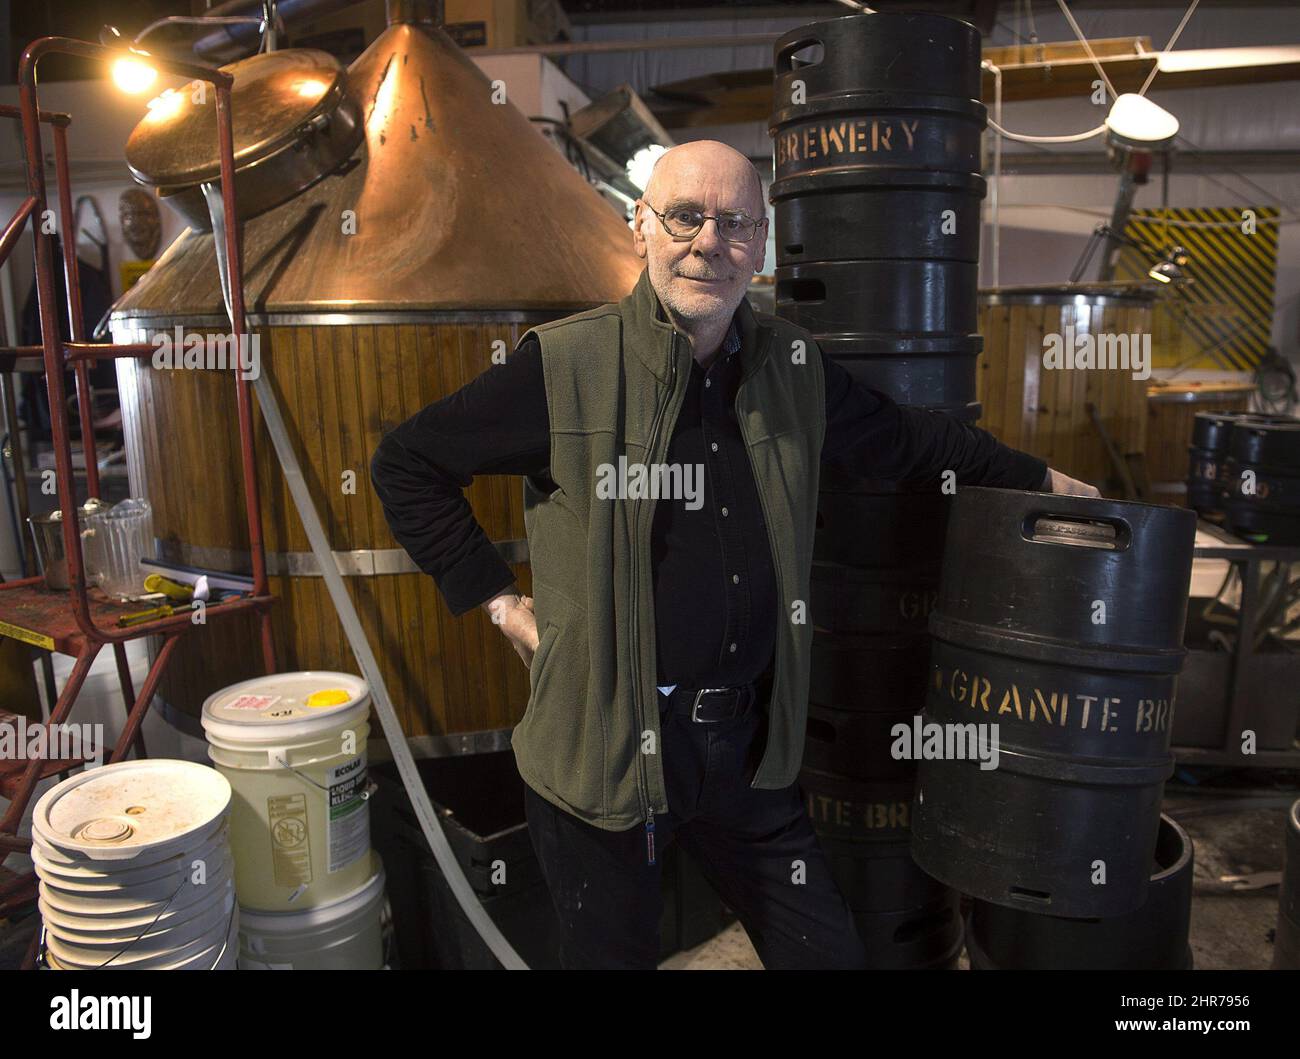 Kevin Keefe, owner of Granite Brewery and president of the Craft Brewers Association of Nova Scotia, stands in his brewing room on Sunday, Feb. 1, 2015. While Keefe was one of the early entrants in the brew pub business back in the 1980's, Nova Scotia now has become a hotbed of craft brewing with no less than 18 breweries and brew pubs now producing a wildly eclectic variety of beer. THE CANADIAN PRESS/Andrew Vaughan Stock Photo